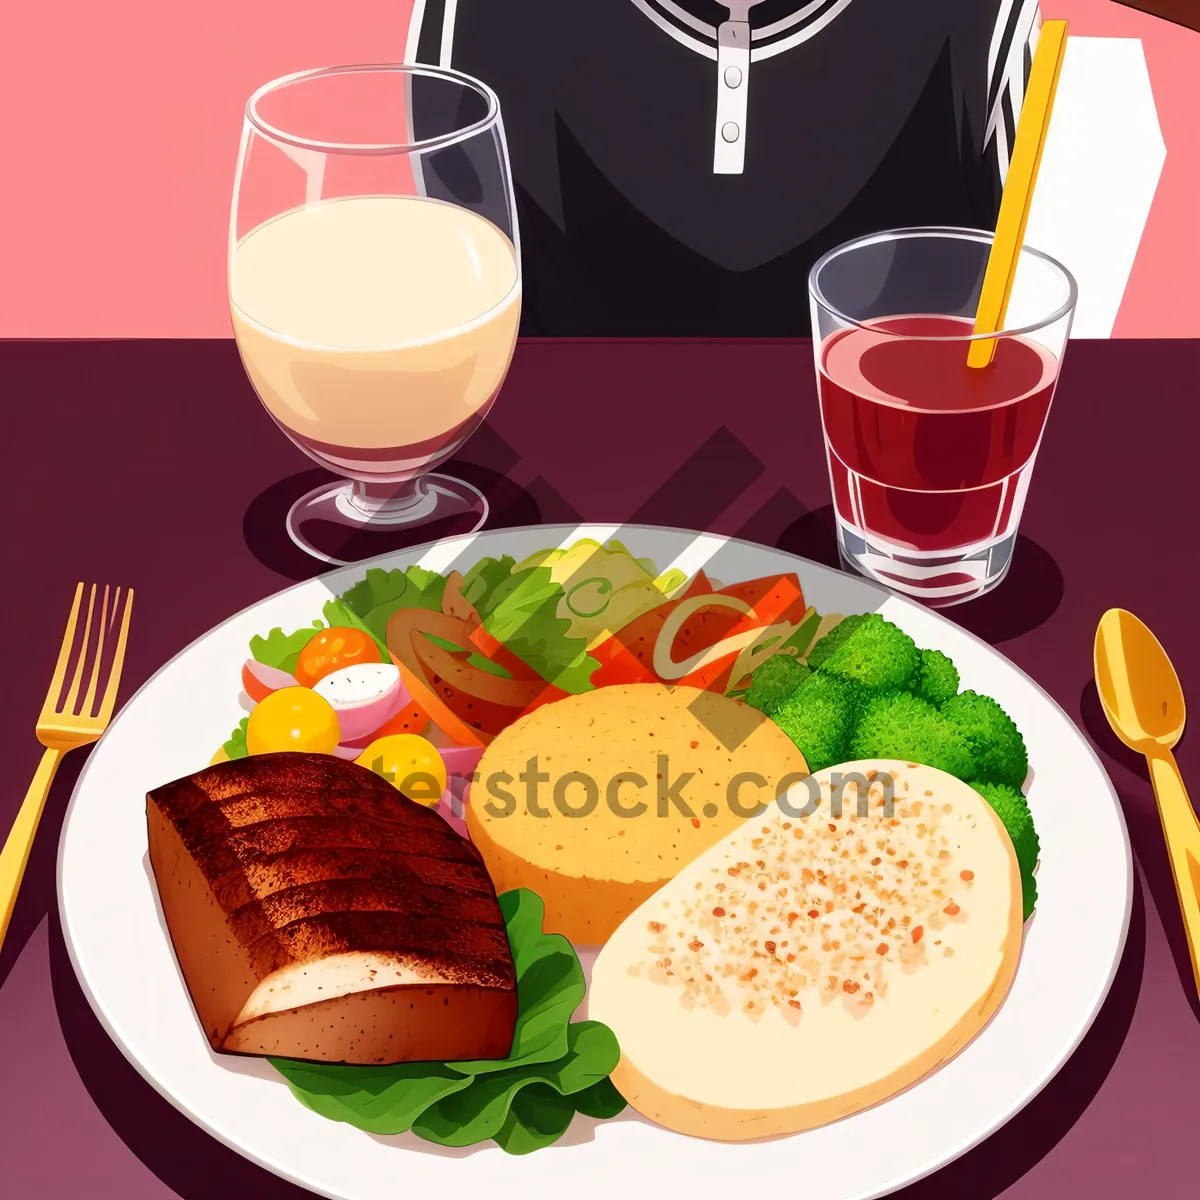 Picture of Delicious Gourmet Meal with Fresh Vegetables and Healthy Salad